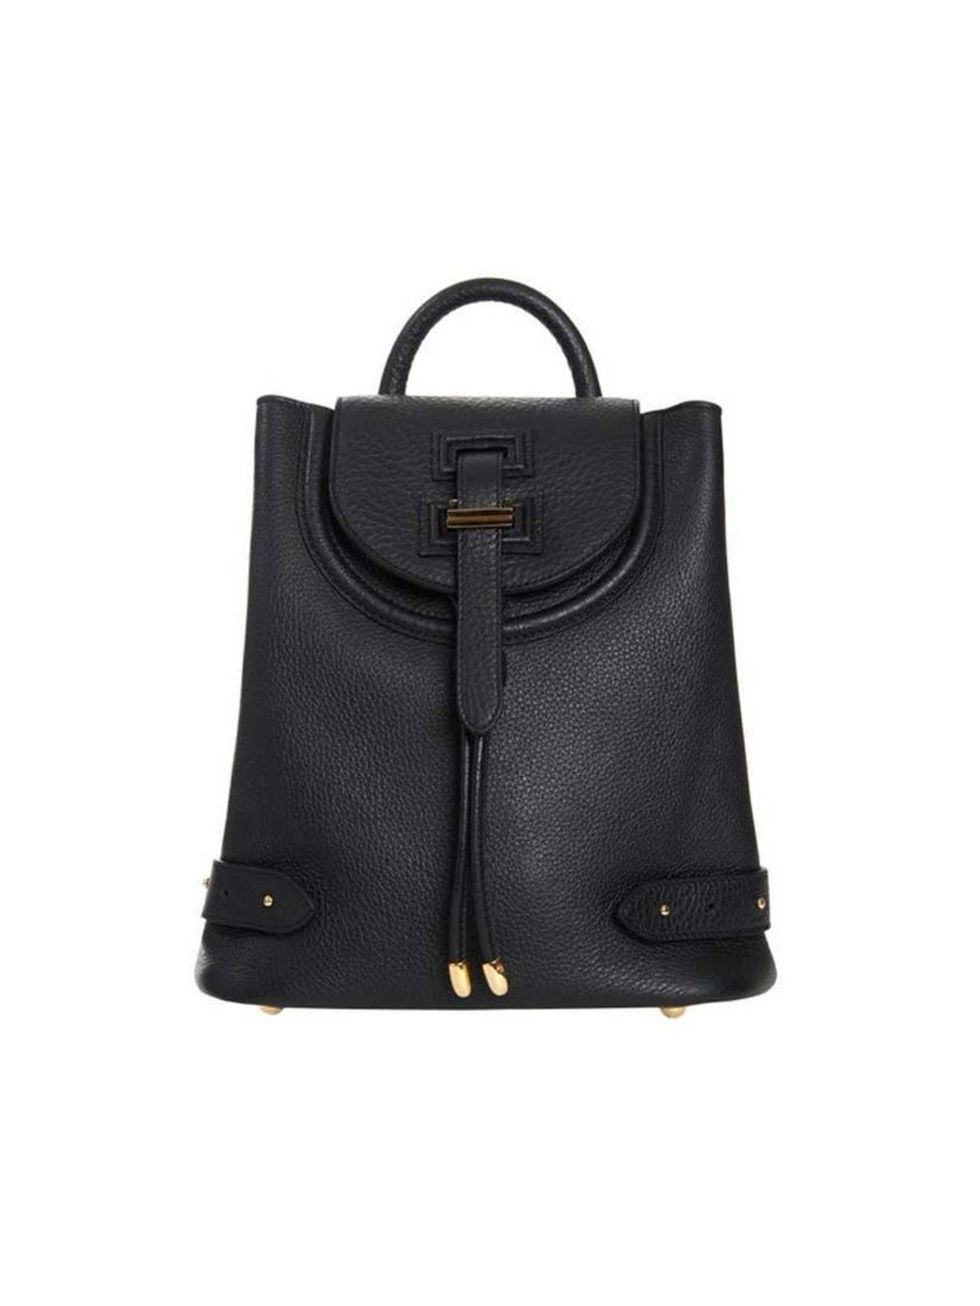 This sleek rucksack is the perfect mix of work and play. Wear with everything you own (but not all at once).

Meli Melo rucksack, £395